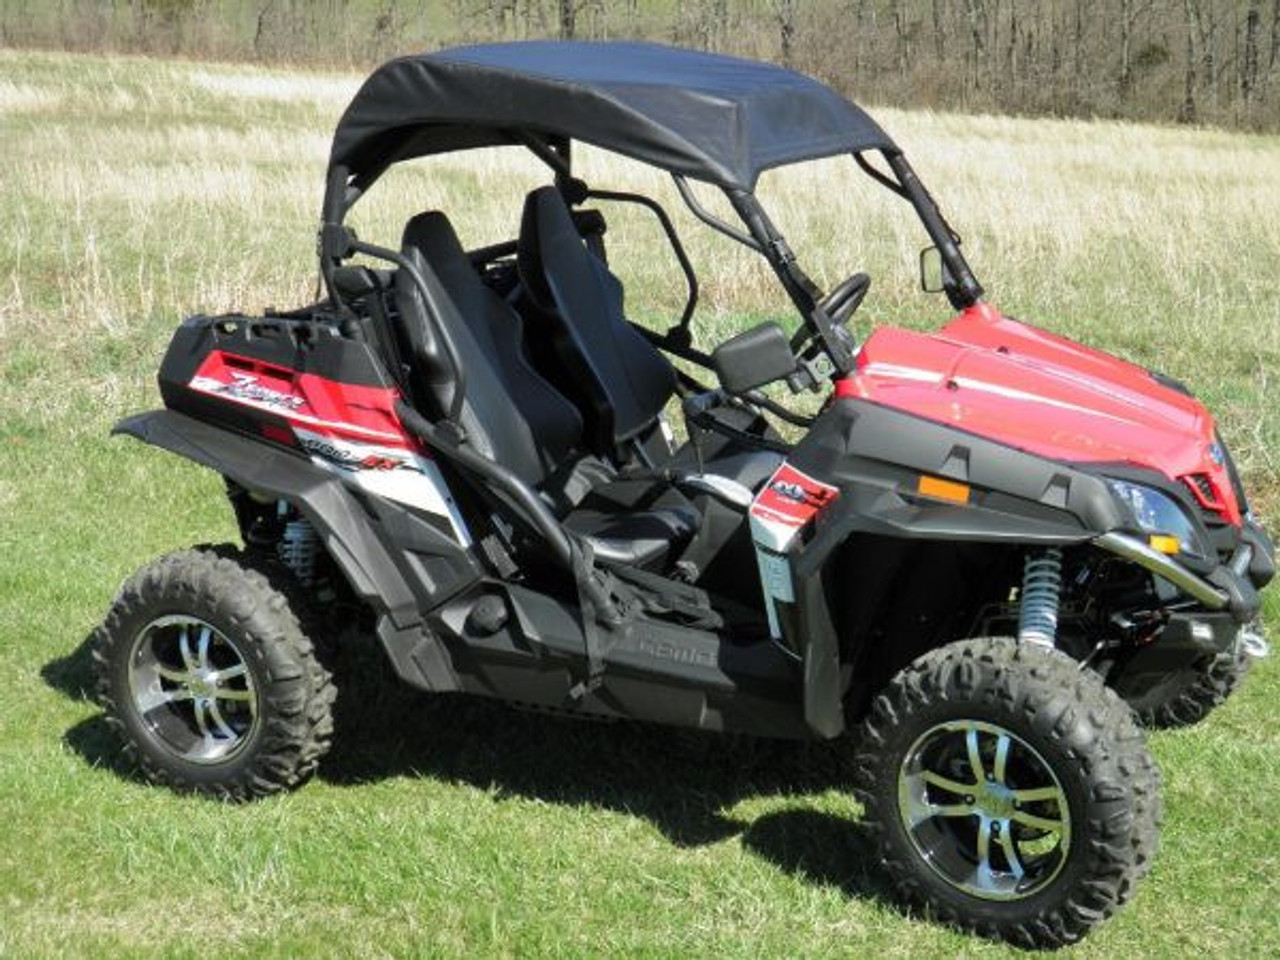 3 Star side x side CF Moto Z-Force 800 Trail 950 Sport and Trail soft top